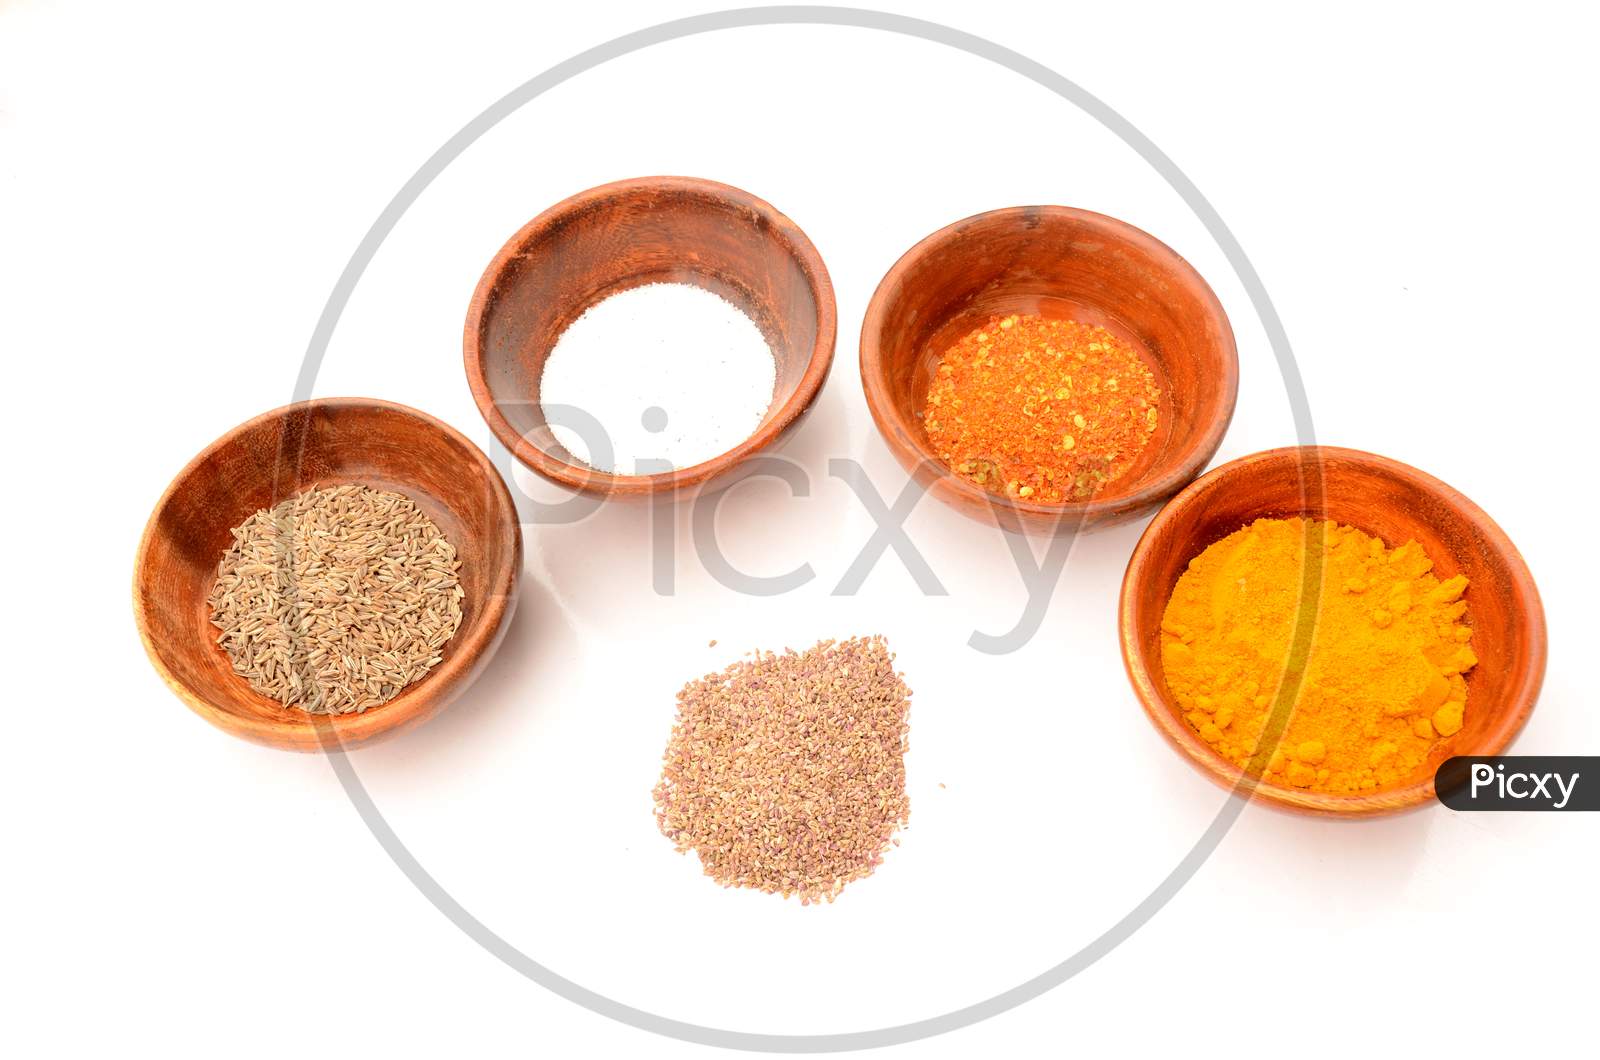 Decorative With Wooden Bowl In The Salt,Cuisine,Cumin,Chilly Powder, Turmeric, On The White Background.